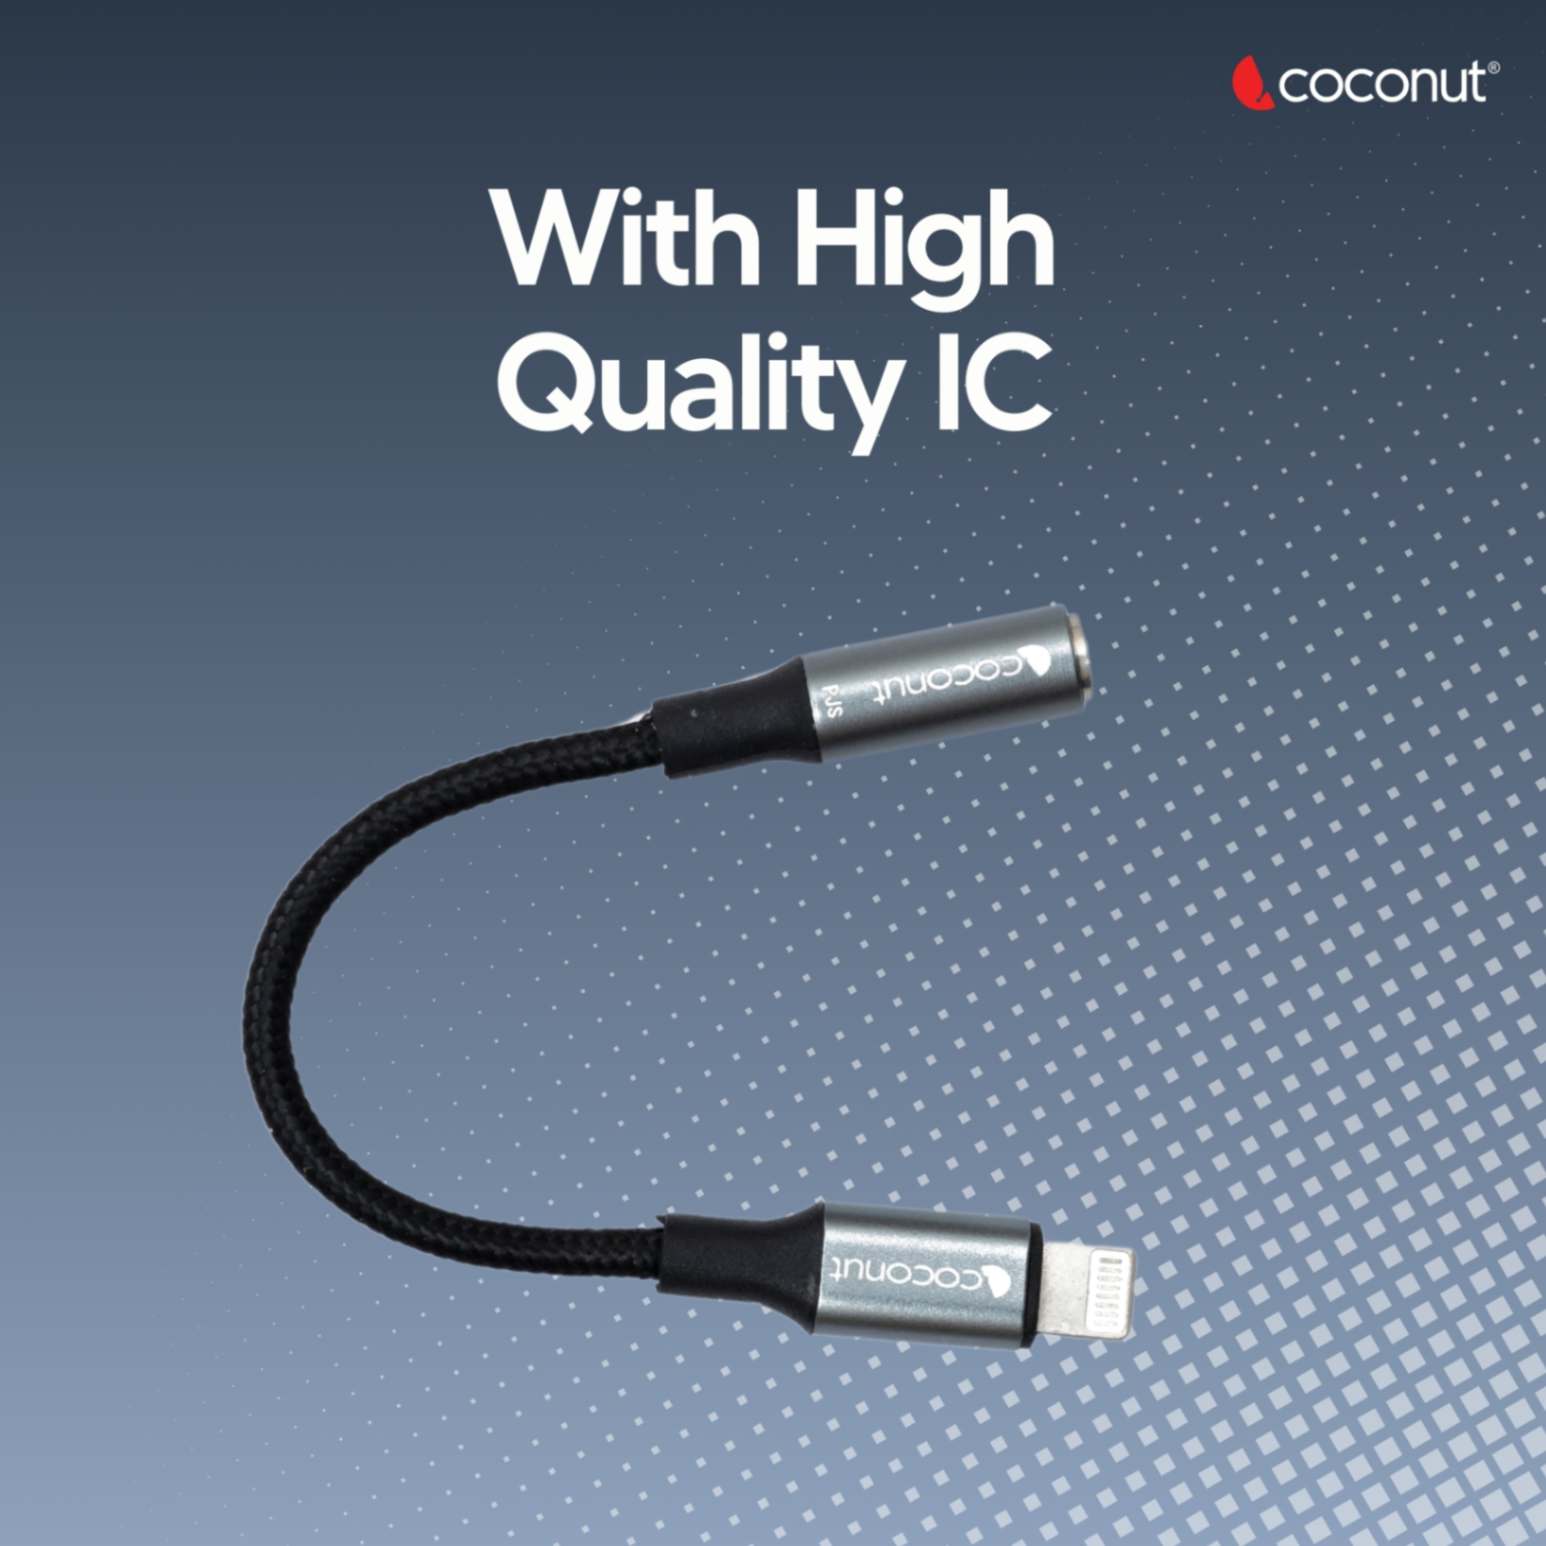 AC02 Lightning to 3.5mm AUX Adapter Connector, High Quality Audio, 6 Months Warranty